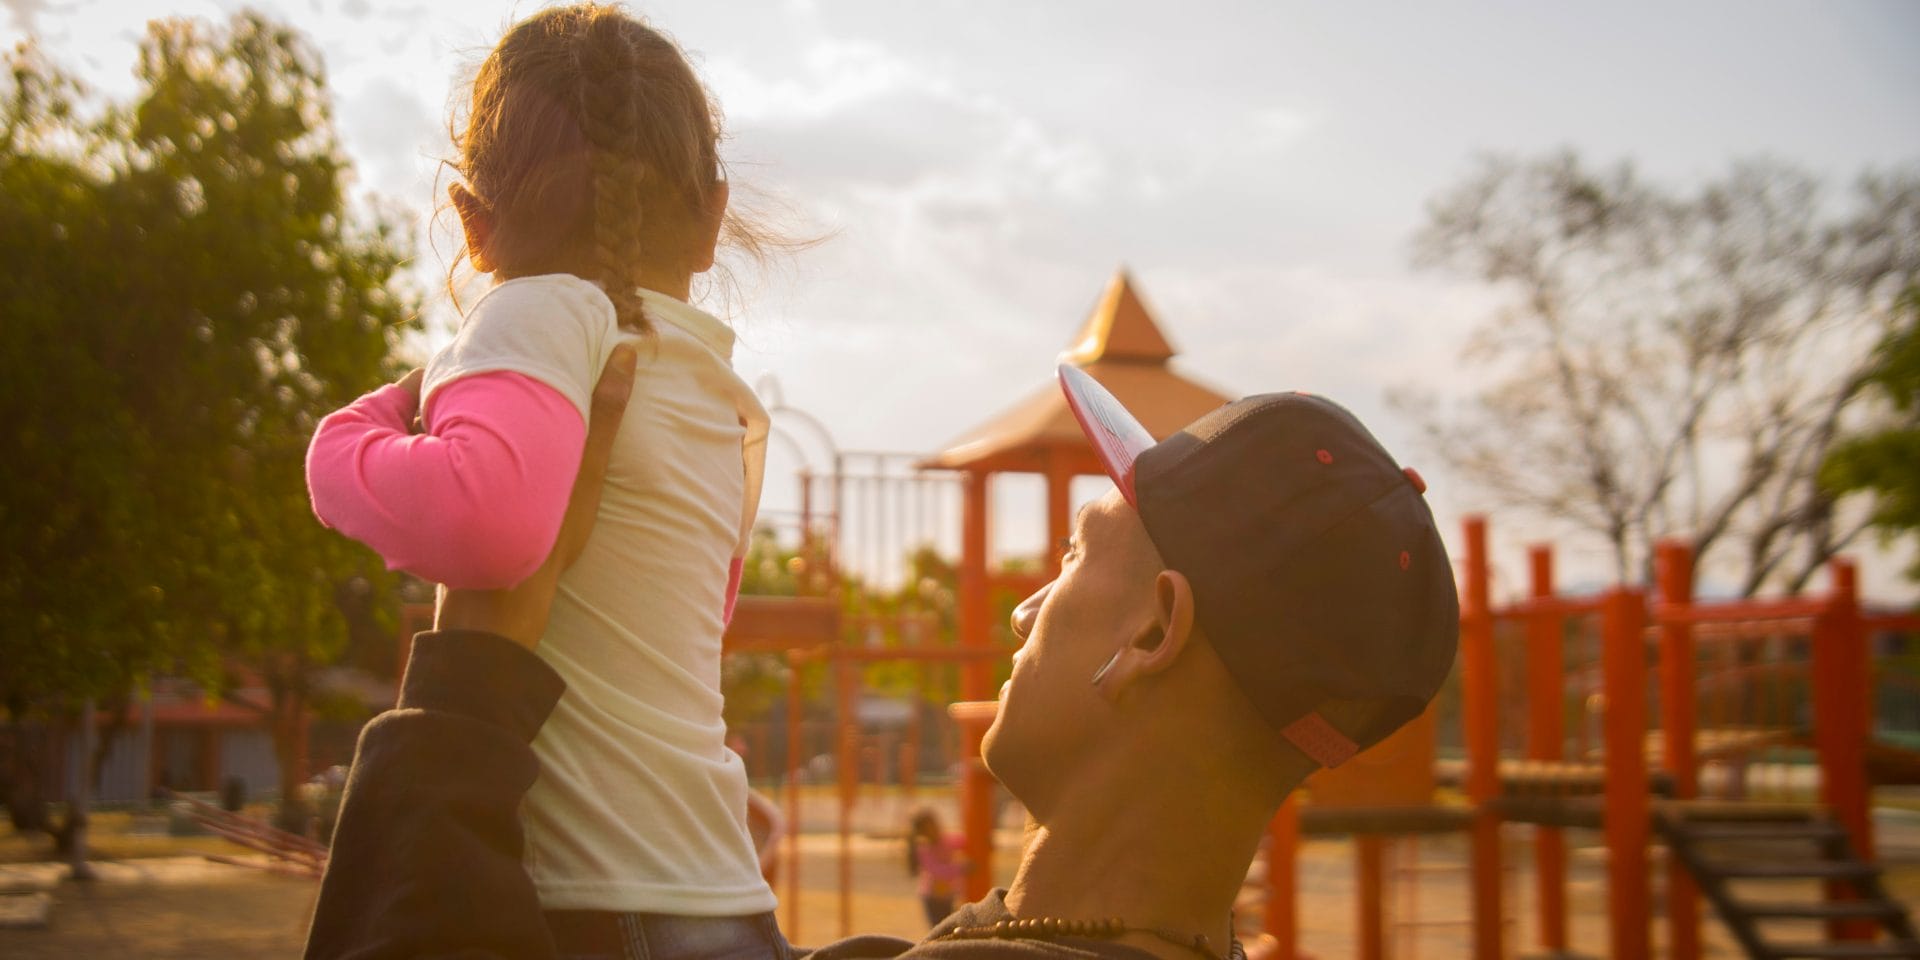 Image of a man in a baseball cap holding up a small girl in a playground.